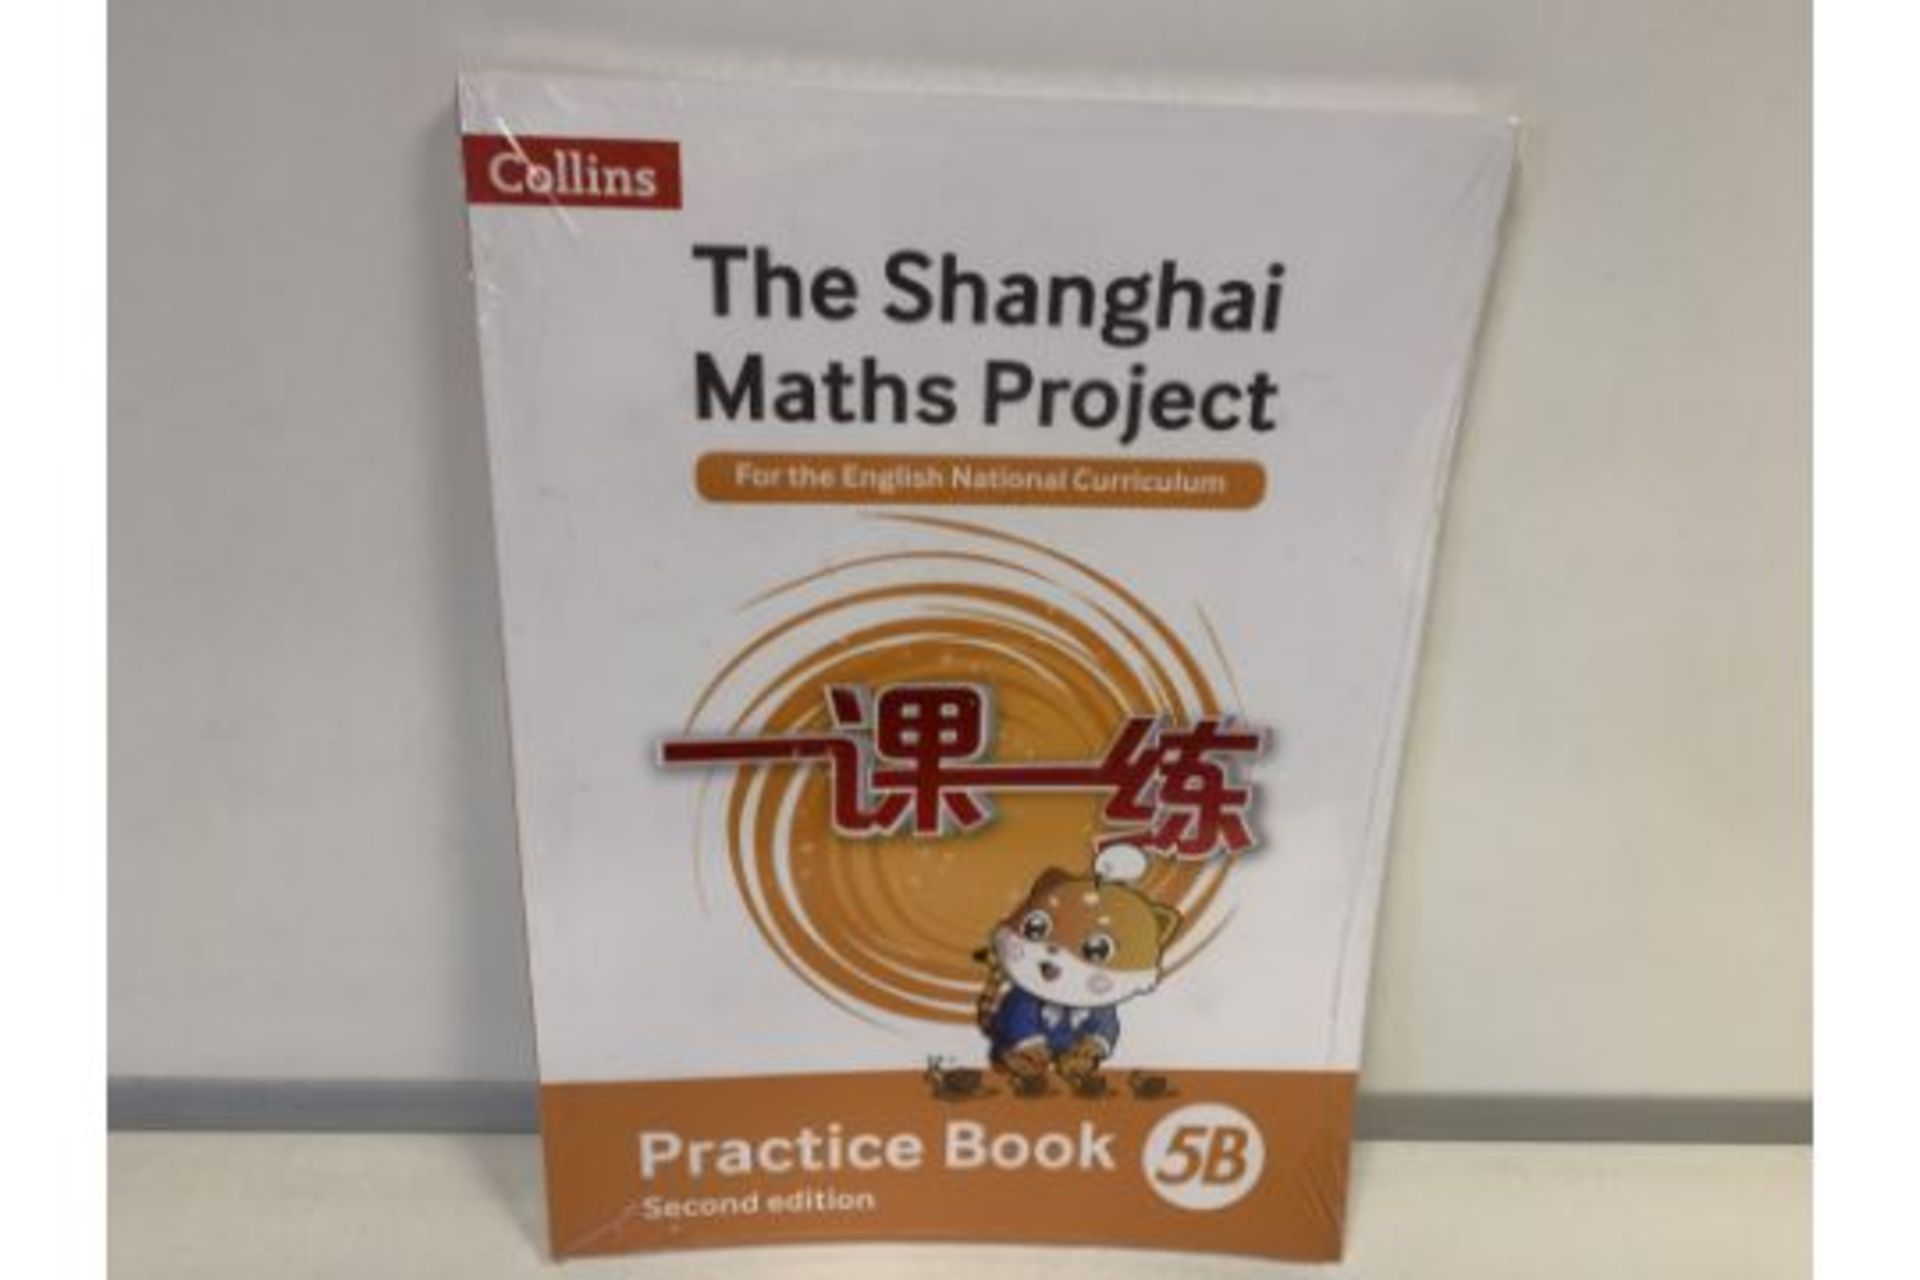 60 X BRAND NEW COLLINS THE SHANGHAI MATHS PROJECT BOOKS